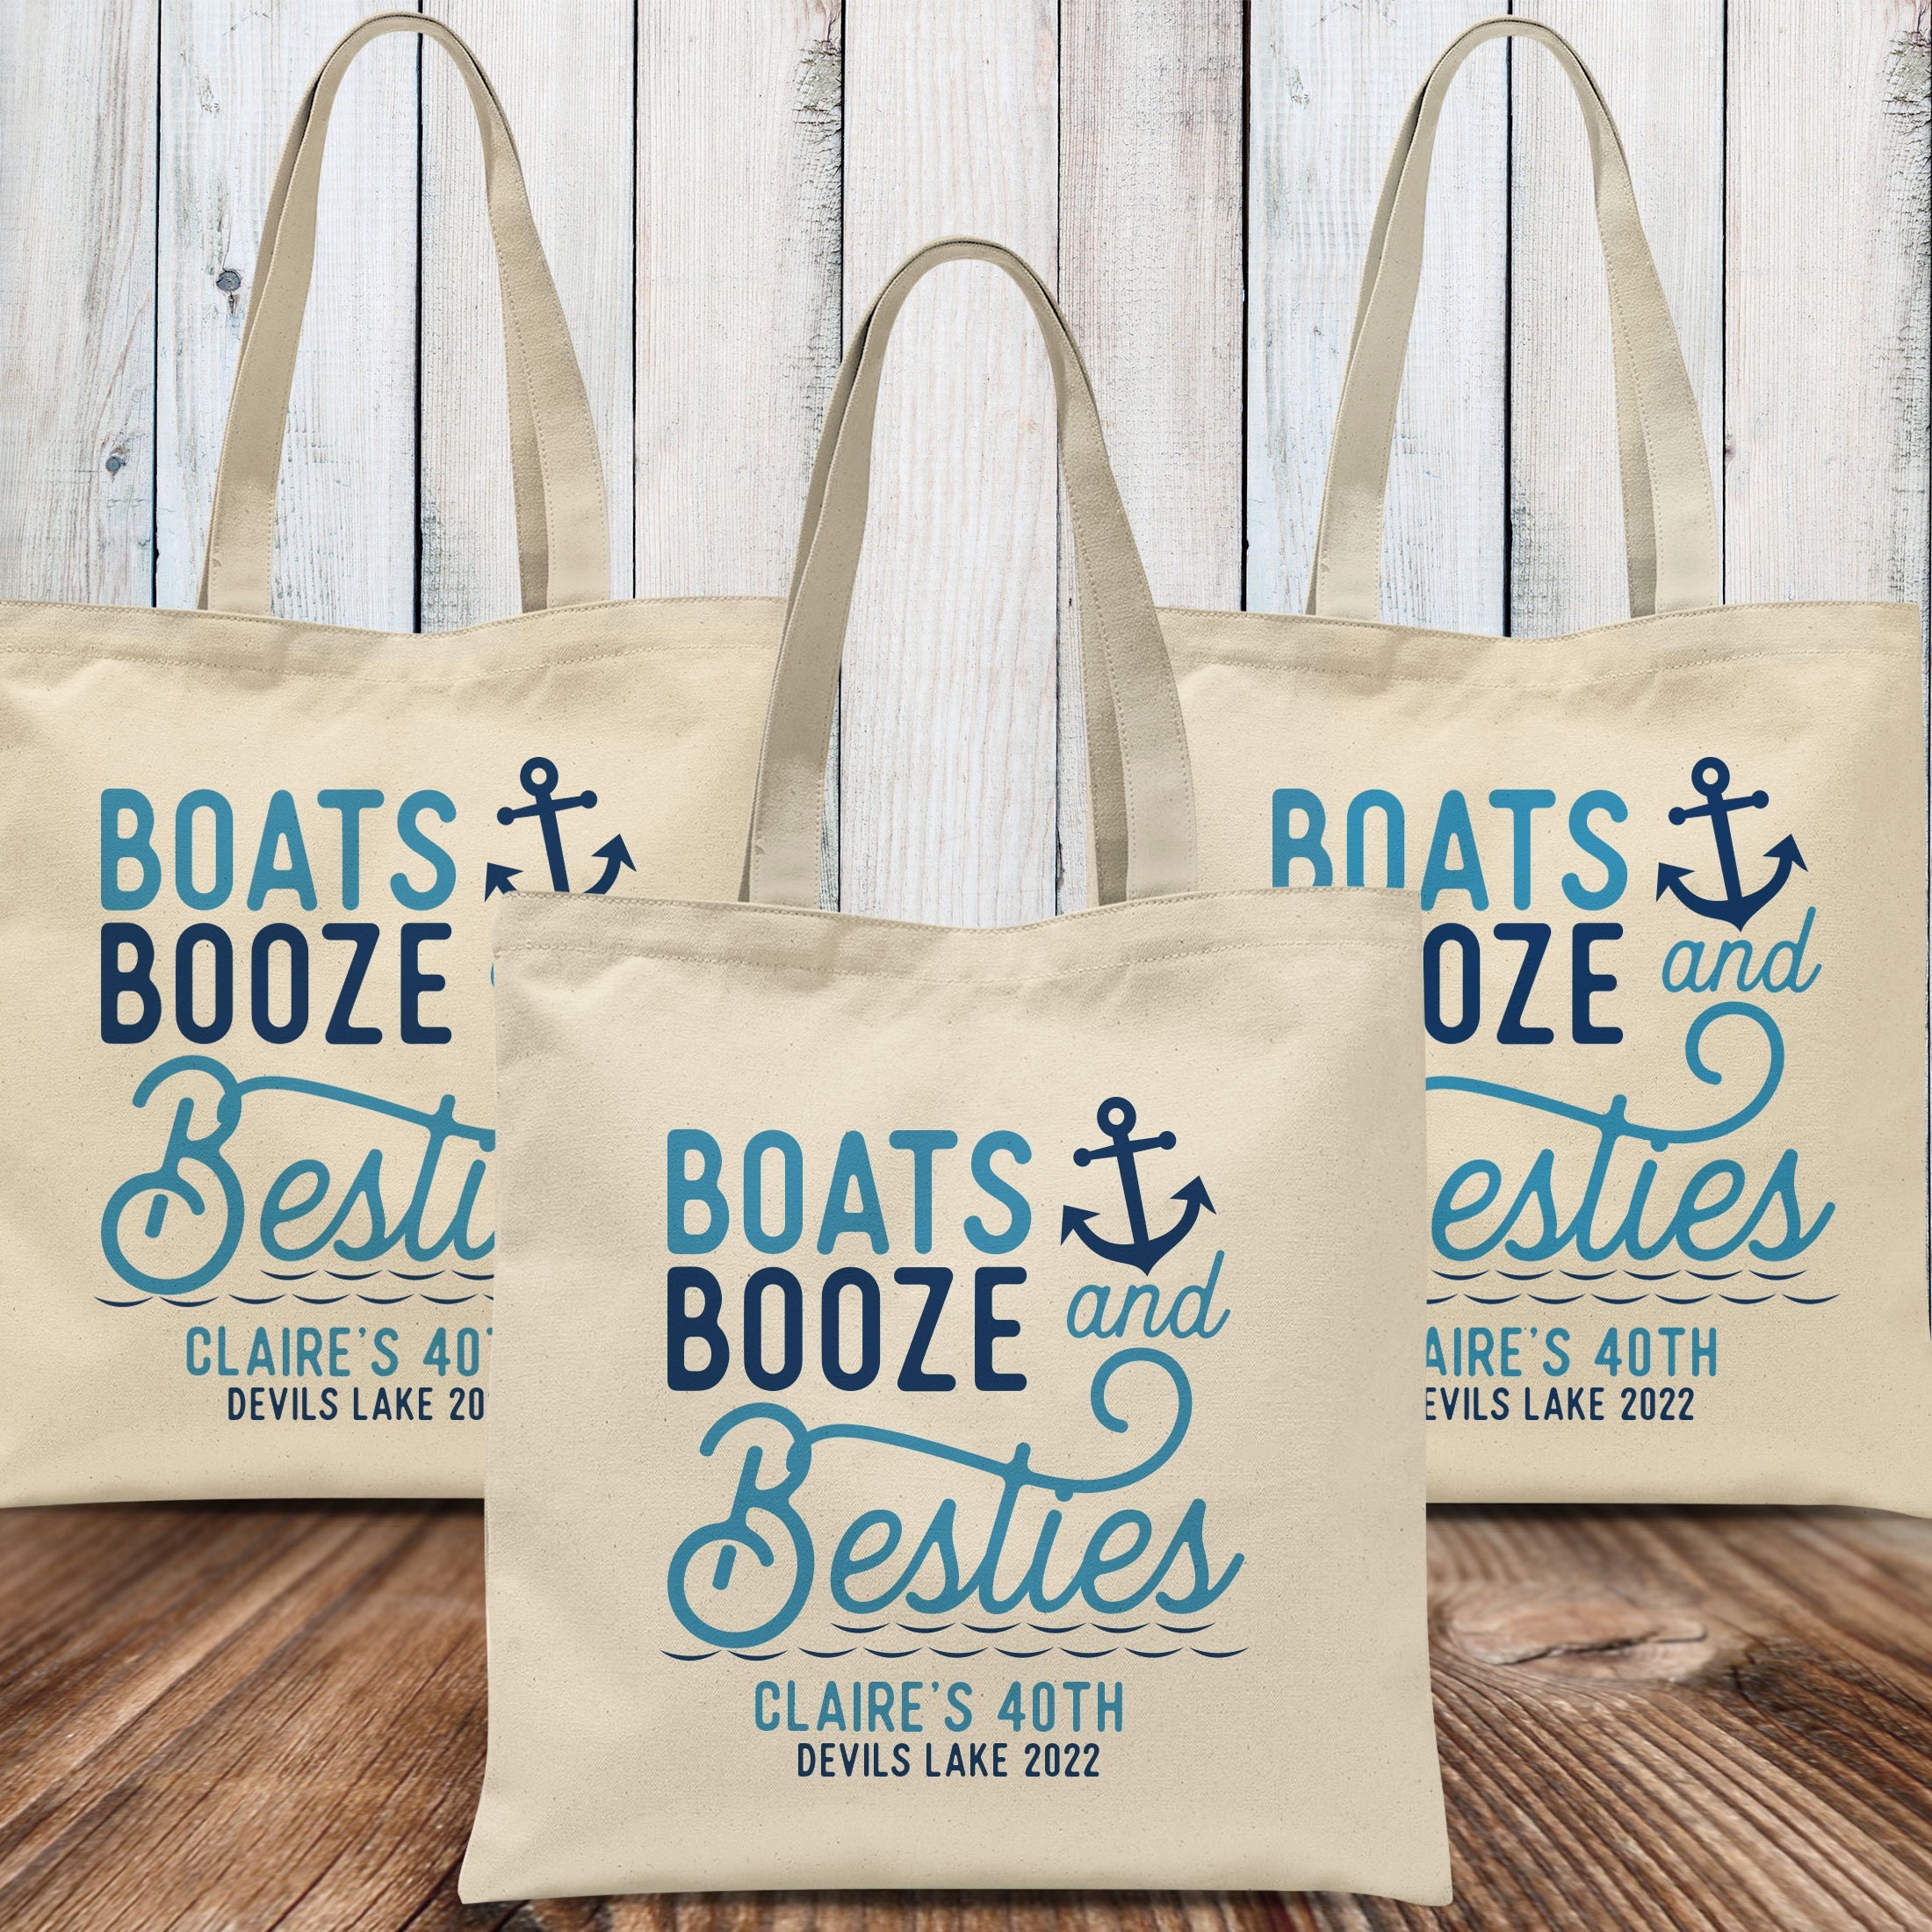 The Great All Is Bliss Premium Tote Bag